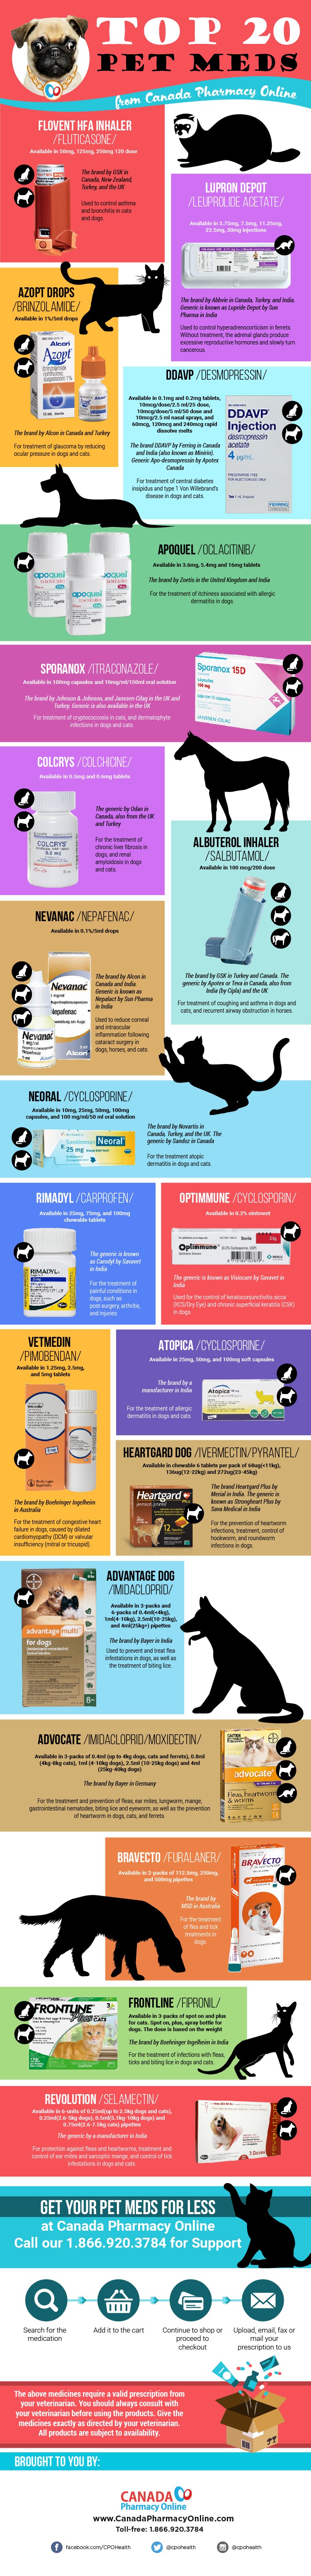 Top 20 Pet Meds from Canada Pharmacy Online #infographic